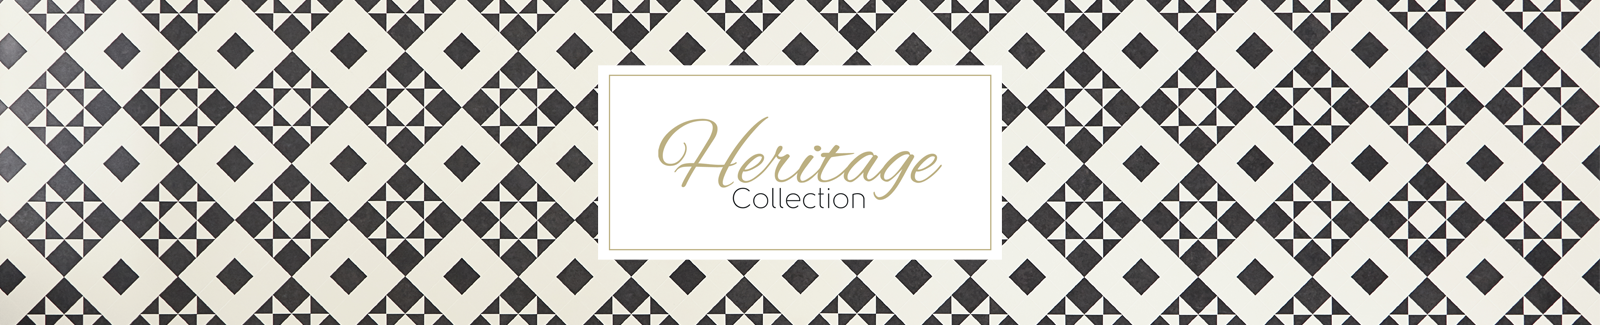 Heritage collection hero image 